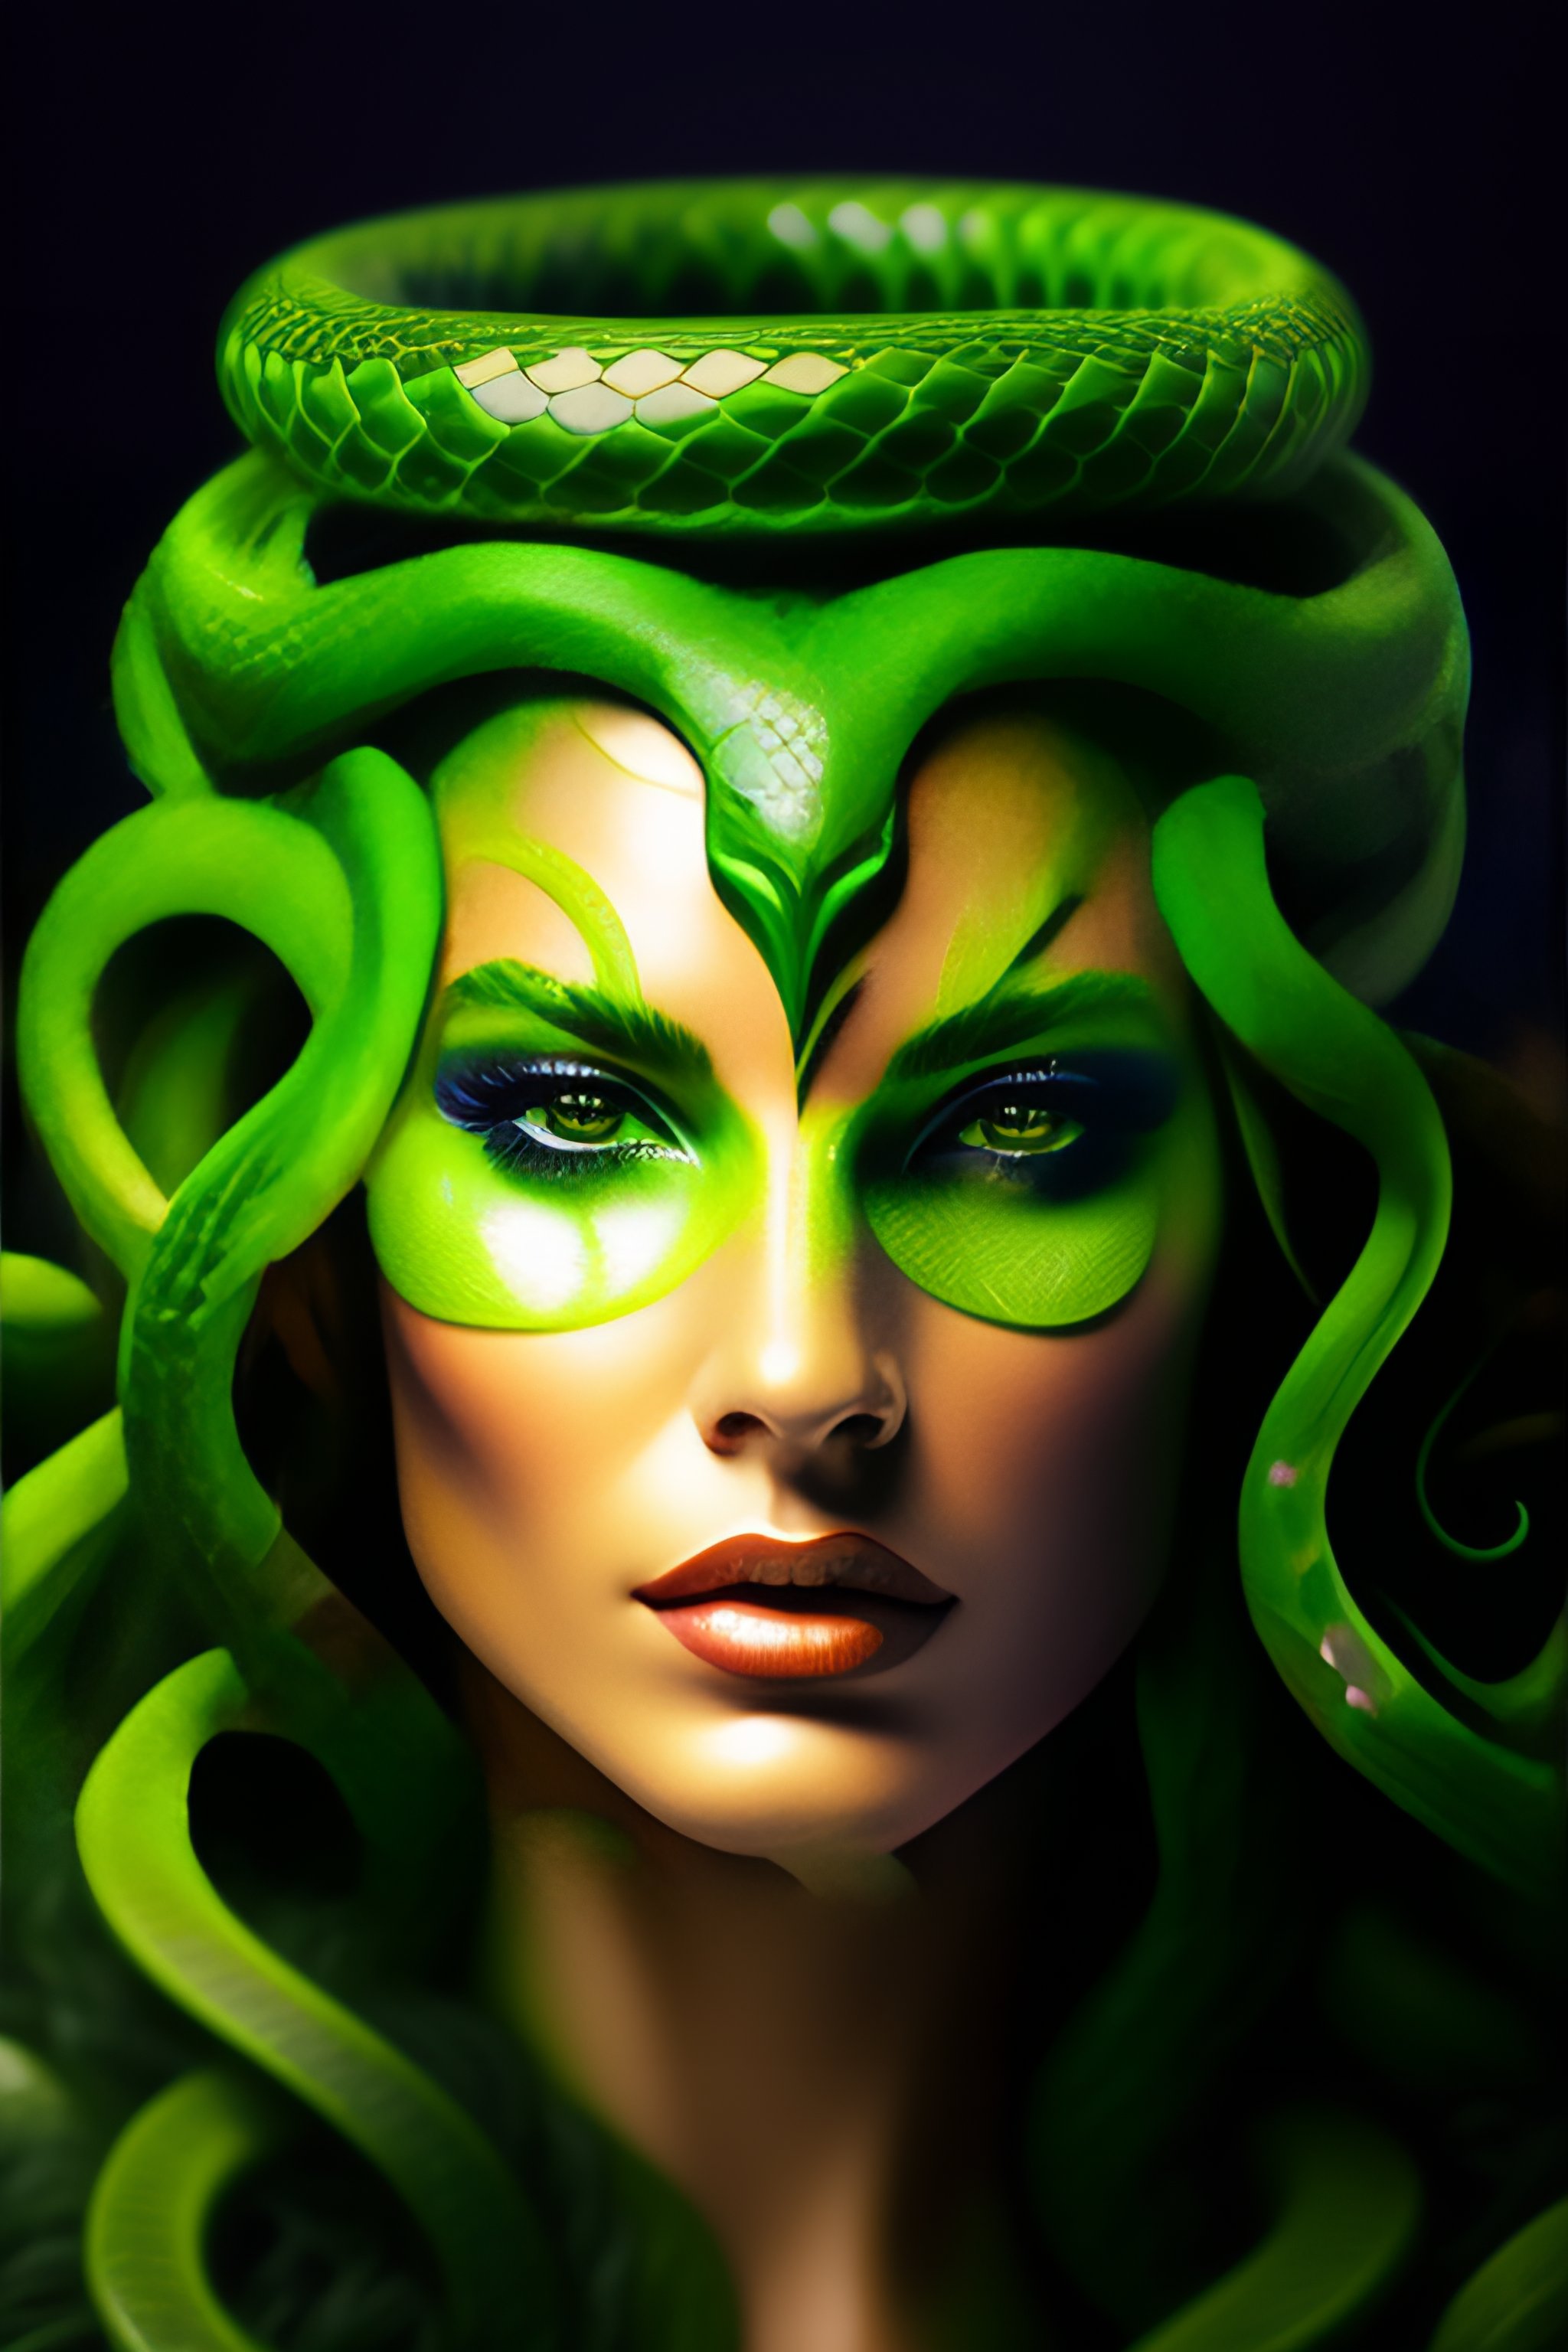 medusa without snakes